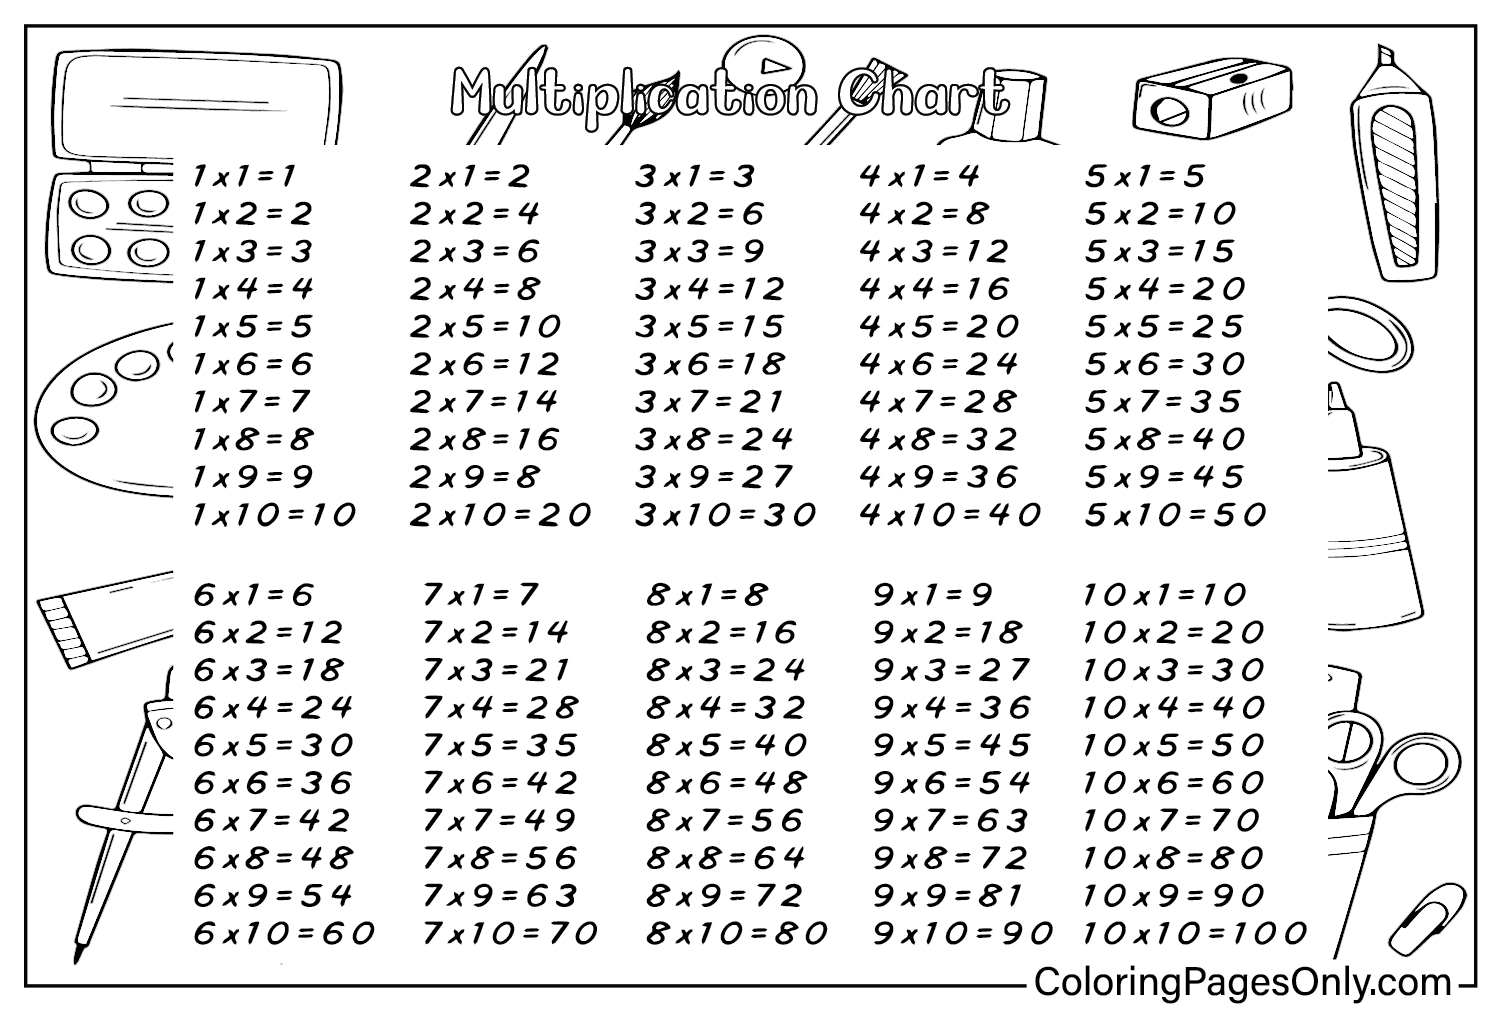 Coloring Sheet Multiplication Chart from Multiplication Chart